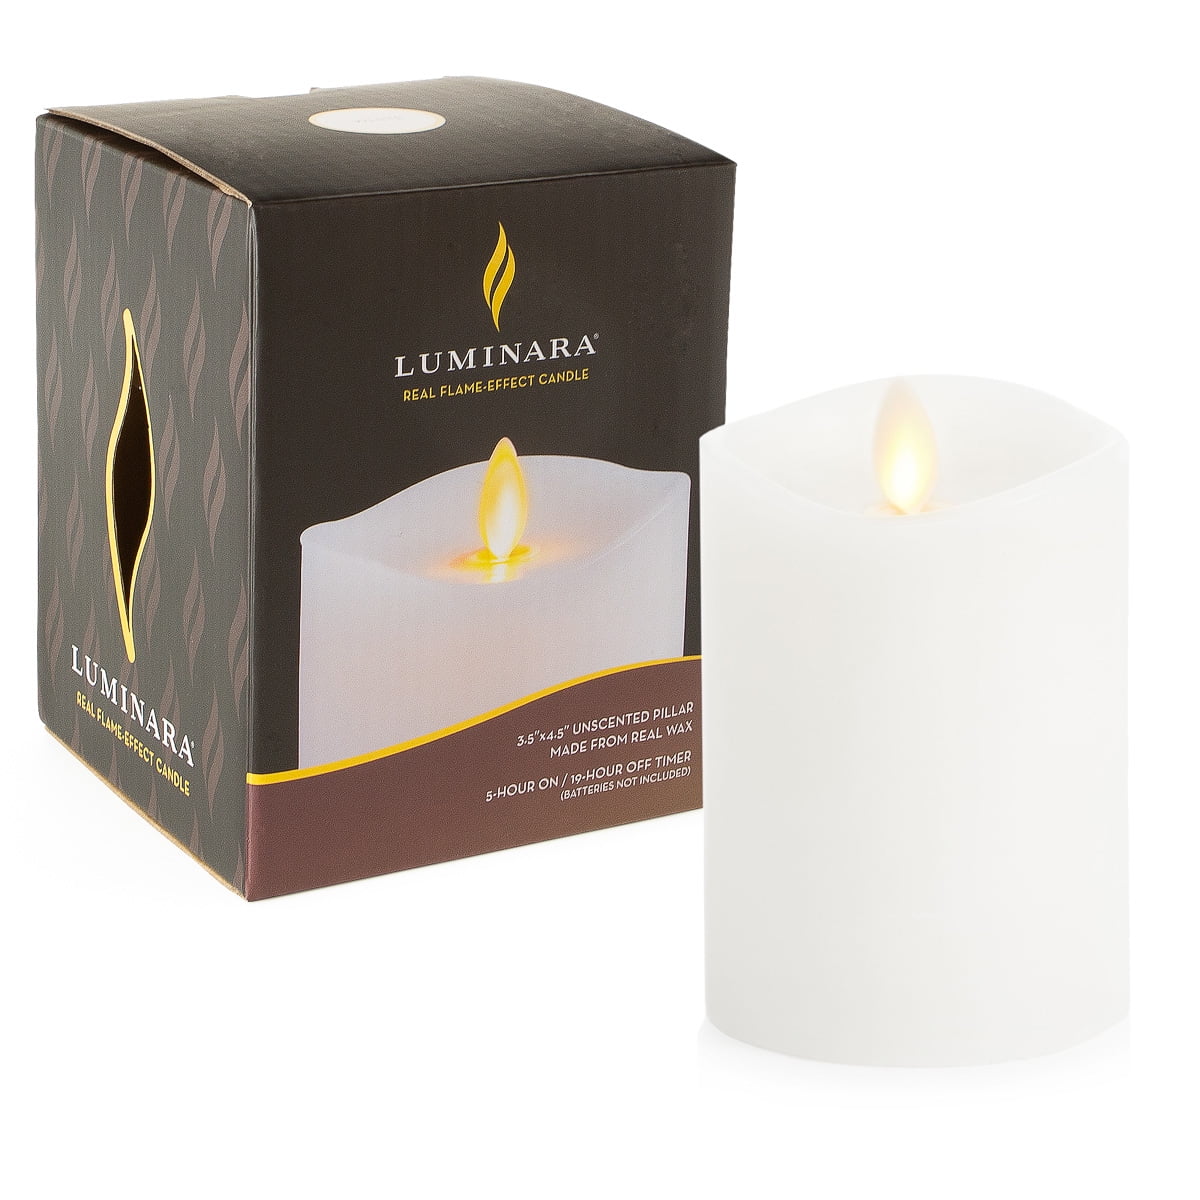 Ivory Real Wax Pillar Flameless Candle Flickering LED Candle 